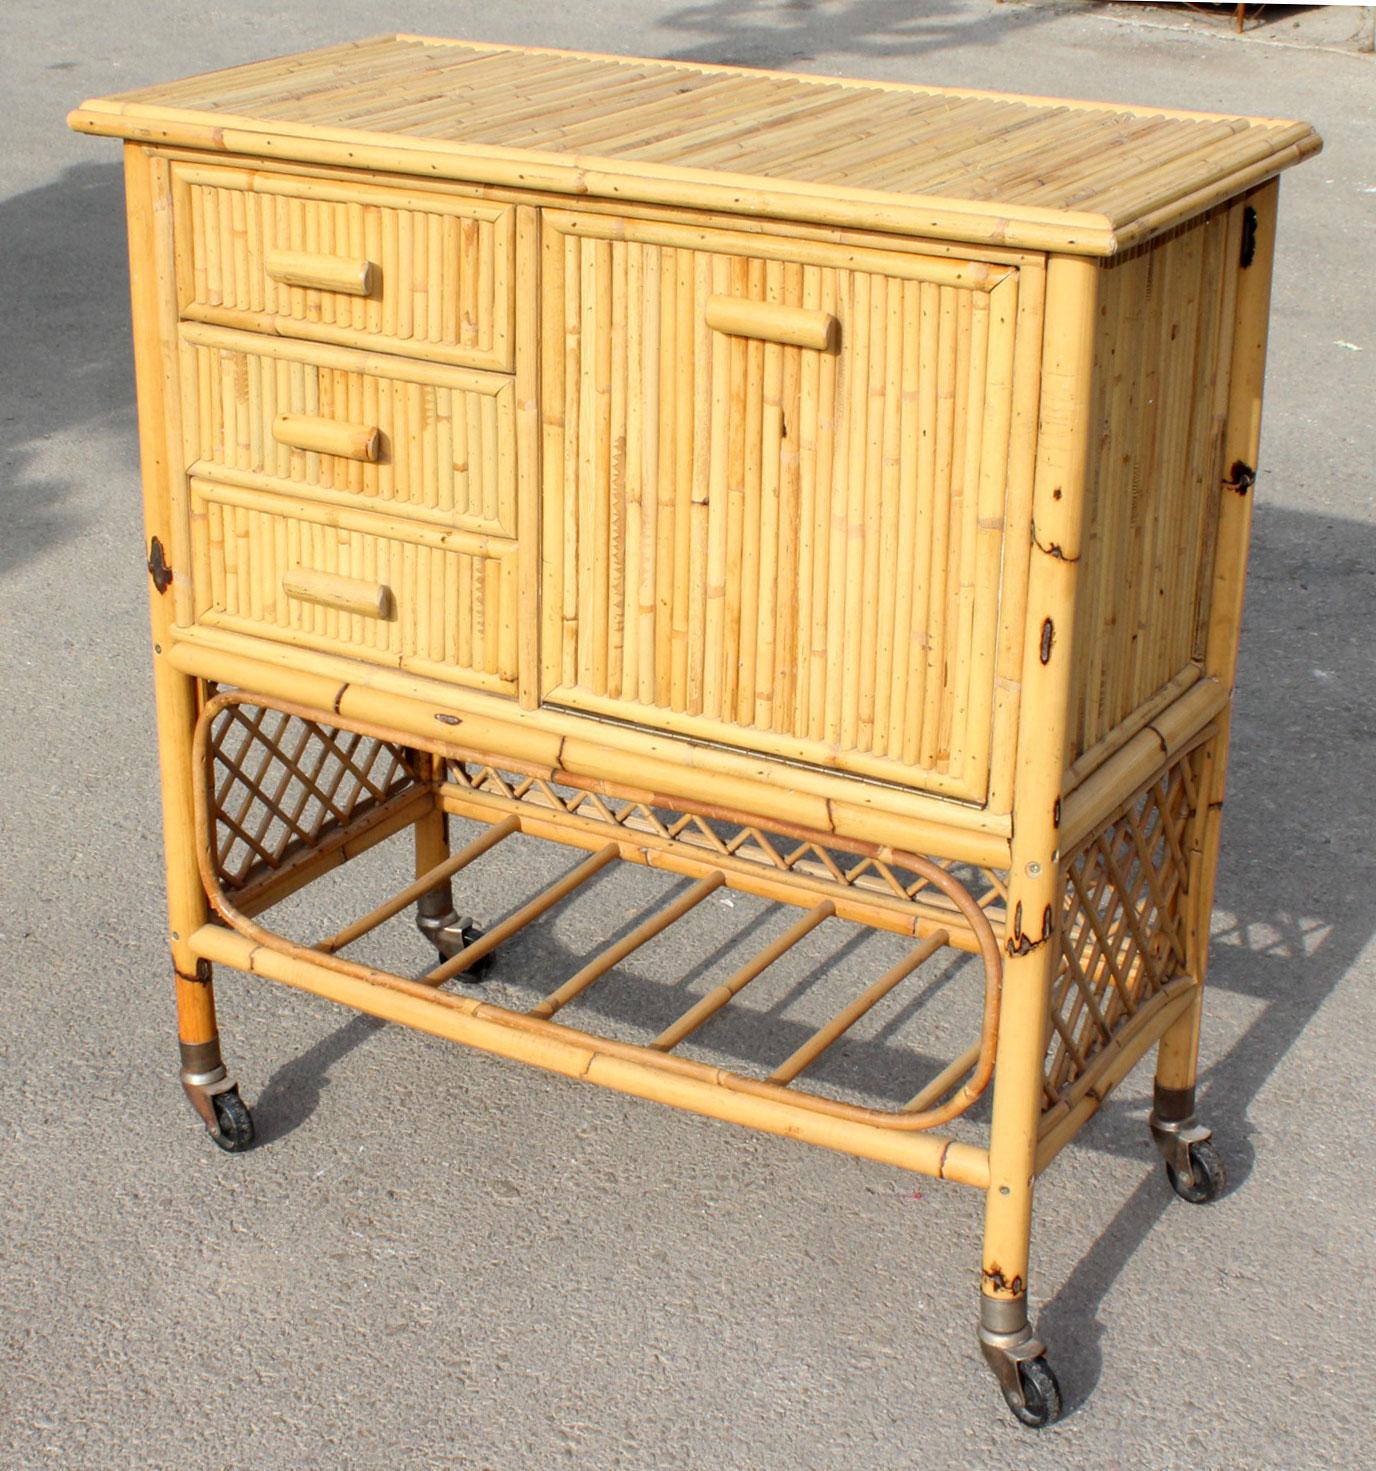 1970s Spanish bamboo bar cart trolley with three drawers, cabinet door and a bottom shelf.

